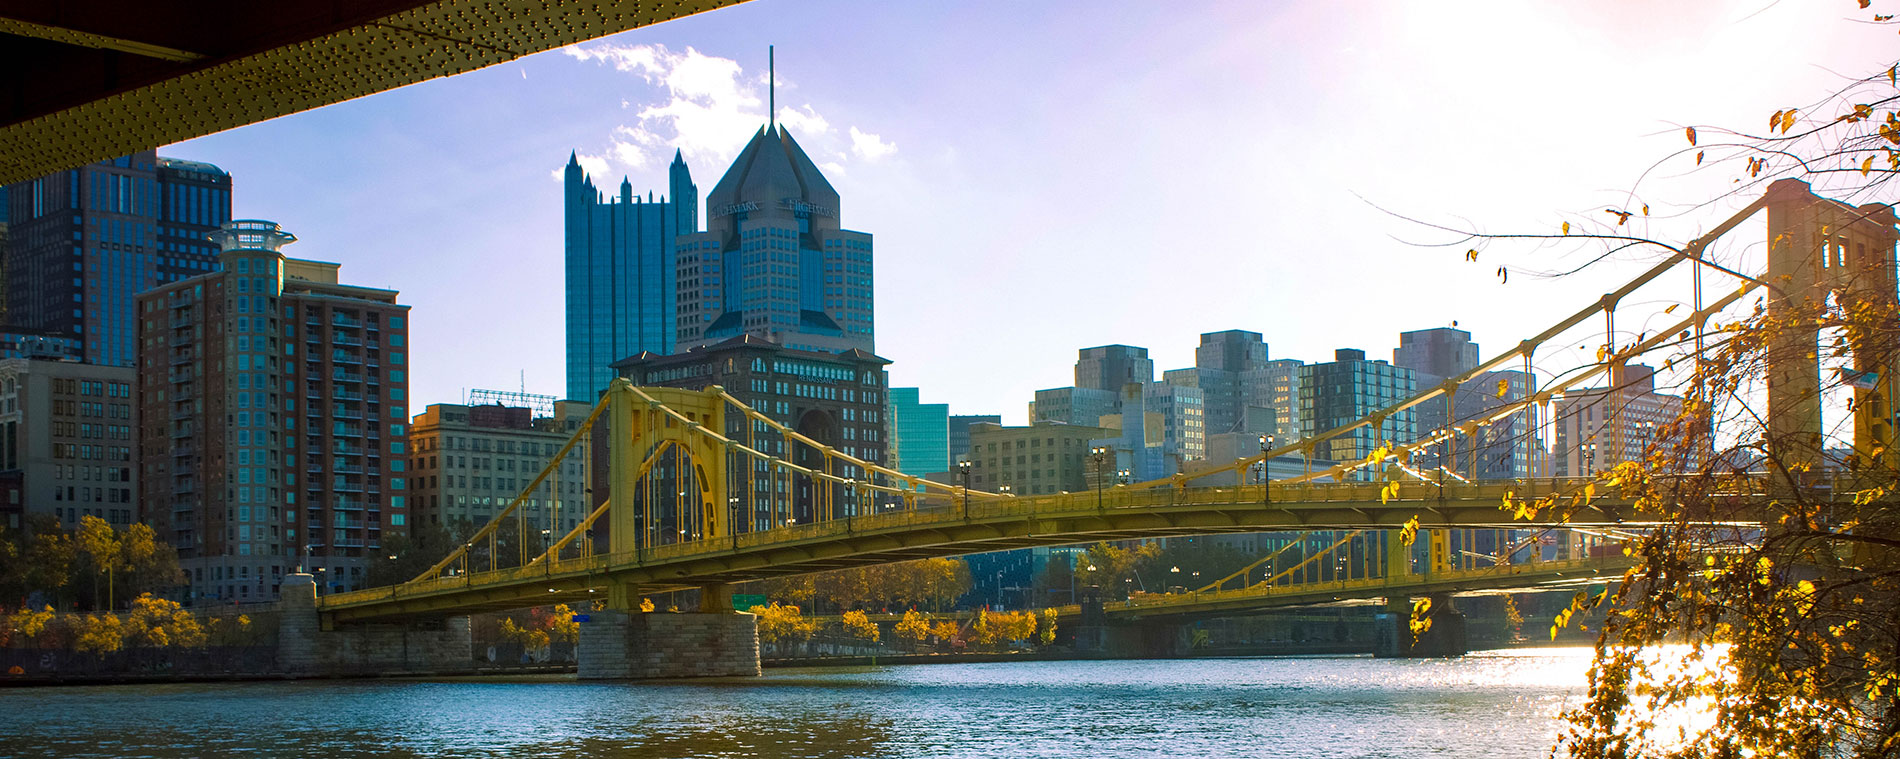 A photo of a bridge and downtown Pittsburgh skyline